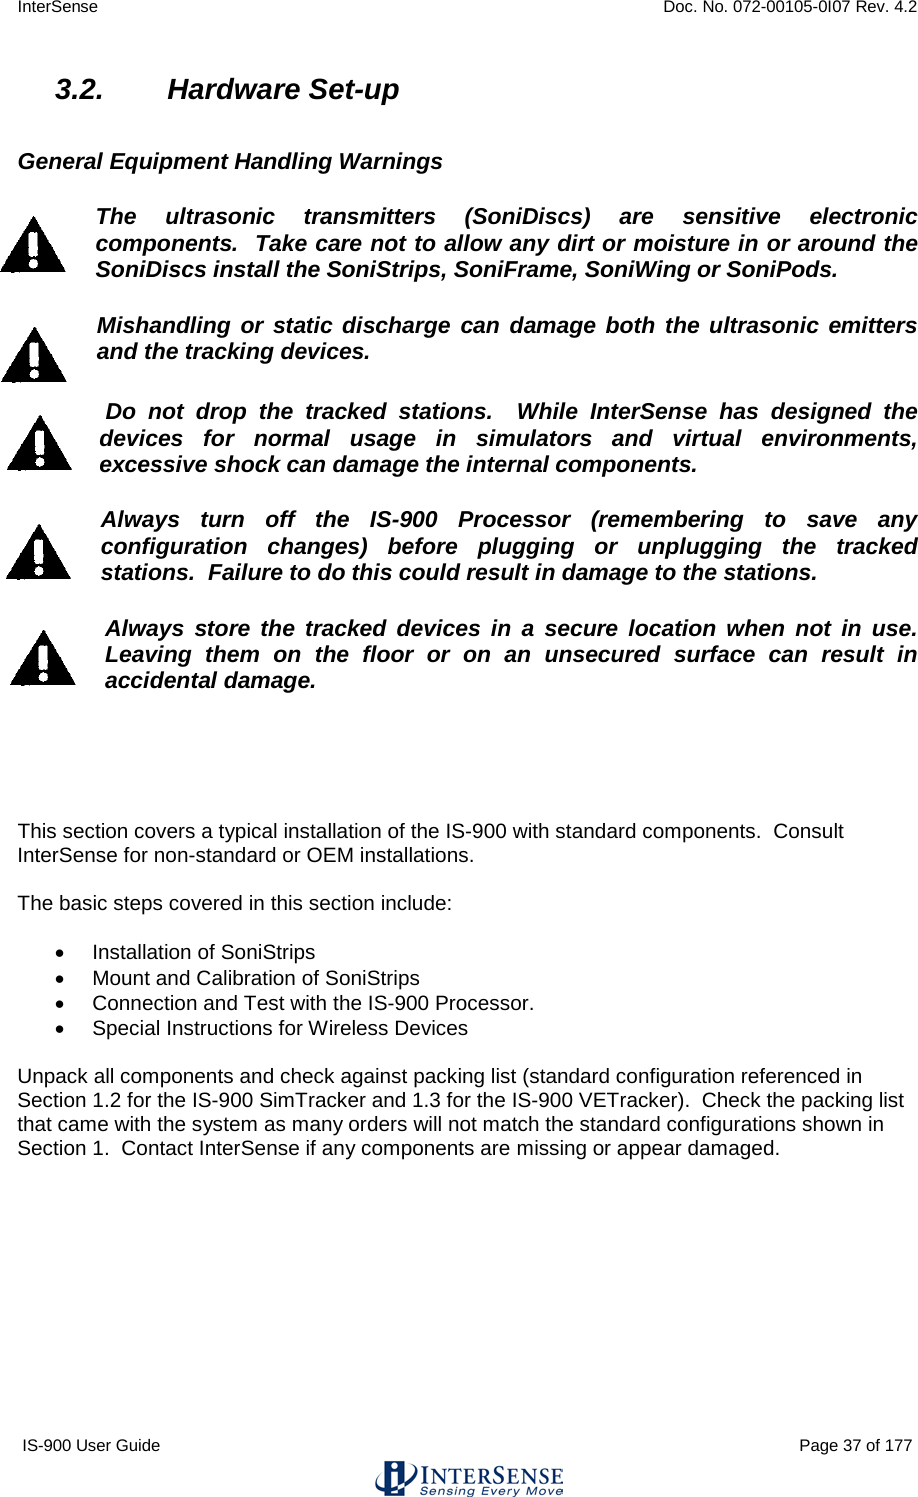 InterSense    Doc. No. 072-00105-0I07 Rev. 4.2 IS-900 User Guide                                                                                                                                          Page 37 of 177  3.2. Hardware Set-up  General Equipment Handling Warnings The ultrasonic transmitters (SoniDiscs) are sensitive electronic components.  Take care not to allow any dirt or moisture in or around the SoniDiscs install the SoniStrips, SoniFrame, SoniWing or SoniPods. Mishandling or static discharge can damage both the ultrasonic emitters  and the tracking devices.   Do not drop the tracked stations.  While InterSense has designed the devices for normal usage in simulators and virtual environments, excessive shock can damage the internal components.  Always turn off the IS-900 Processor (remembering to save any configuration changes) before plugging or unplugging the tracked stations.  Failure to do this could result in damage to the stations. Always store the tracked devices in a secure location when not in use.  Leaving them on the floor or on an unsecured surface can result in accidental damage.      This section covers a typical installation of the IS-900 with standard components.  Consult InterSense for non-standard or OEM installations.  The basic steps covered in this section include:  • Installation of SoniStrips • Mount and Calibration of SoniStrips • Connection and Test with the IS-900 Processor. • Special Instructions for Wireless Devices  Unpack all components and check against packing list (standard configuration referenced in Section 1.2 for the IS-900 SimTracker and 1.3 for the IS-900 VETracker).  Check the packing list that came with the system as many orders will not match the standard configurations shown in Section 1.  Contact InterSense if any components are missing or appear damaged.    